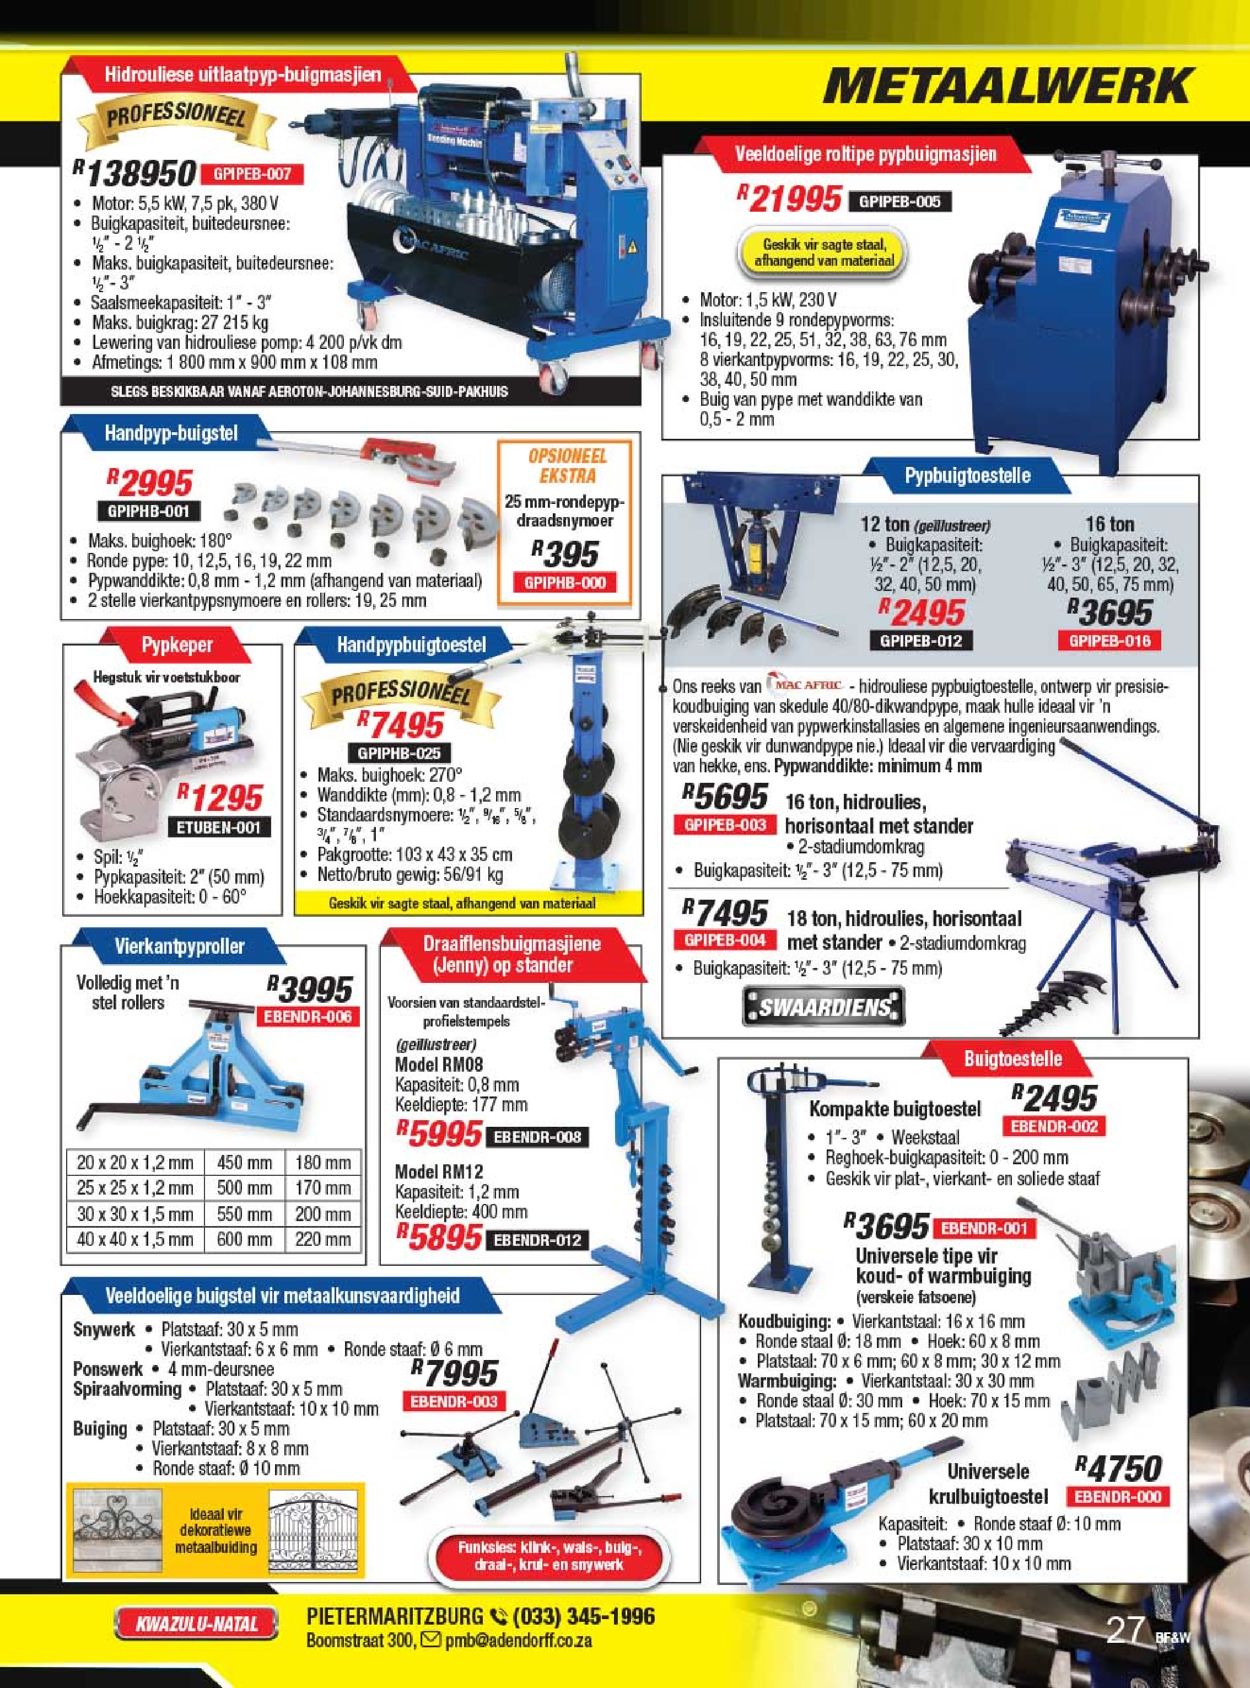 Adendorff Machinery Mart Catalogue from 2022/02/14